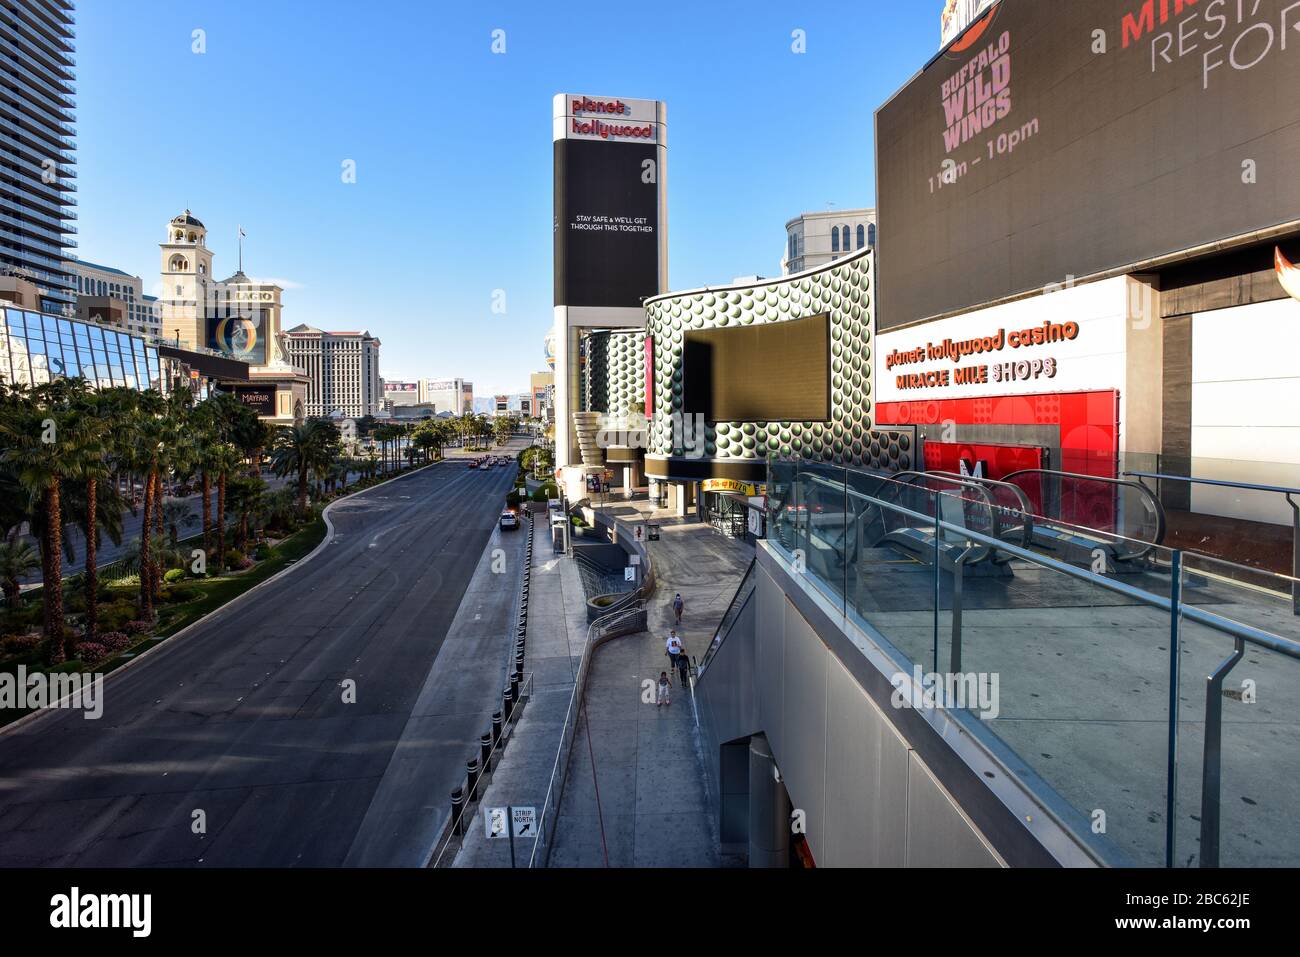 The Las Vegas shut down due to Coronavirus, the Strip is fairly empty. No people on the streets and everything is closed. Stock Photo